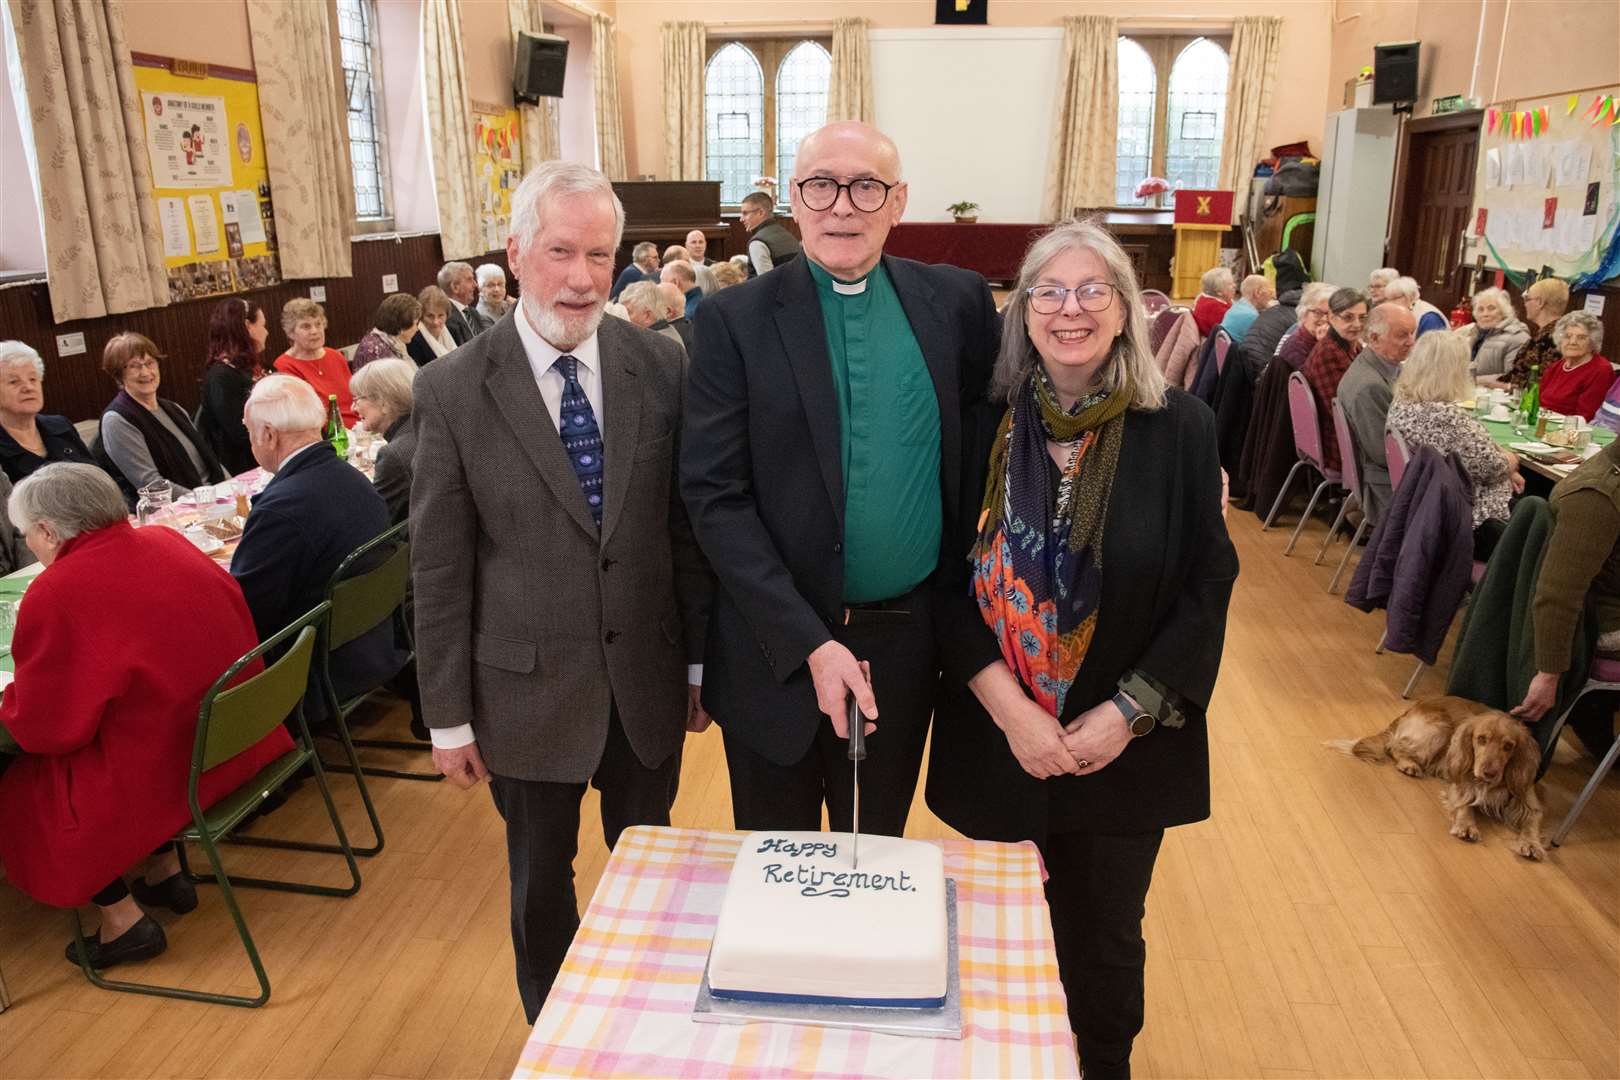 Reverend Donald Prentice retires from St Leonard's Church in Forres...He is joined by Roy Anderson (left) and wife Alison Prentice (right)...Picture: Daniel Forsyth..